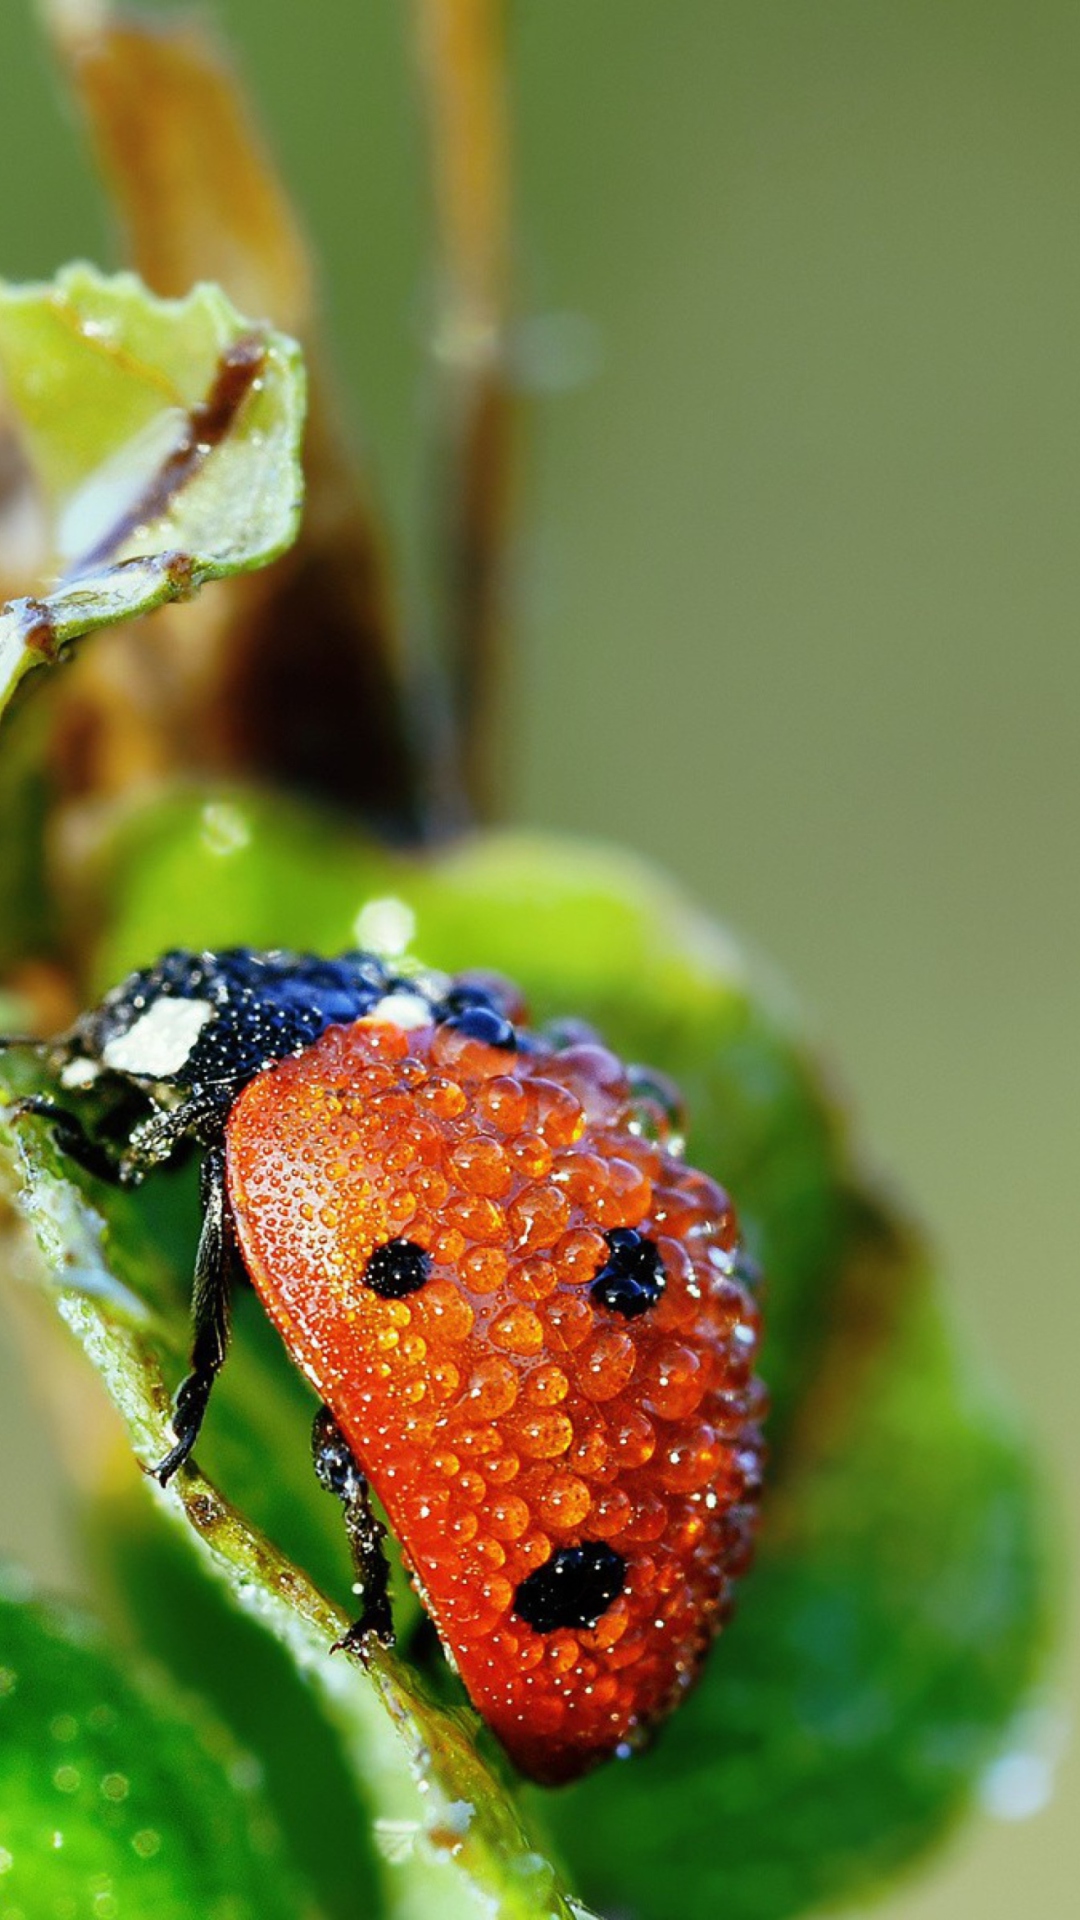 Ladybug Covered With Dew Drops screenshot #1 1080x1920